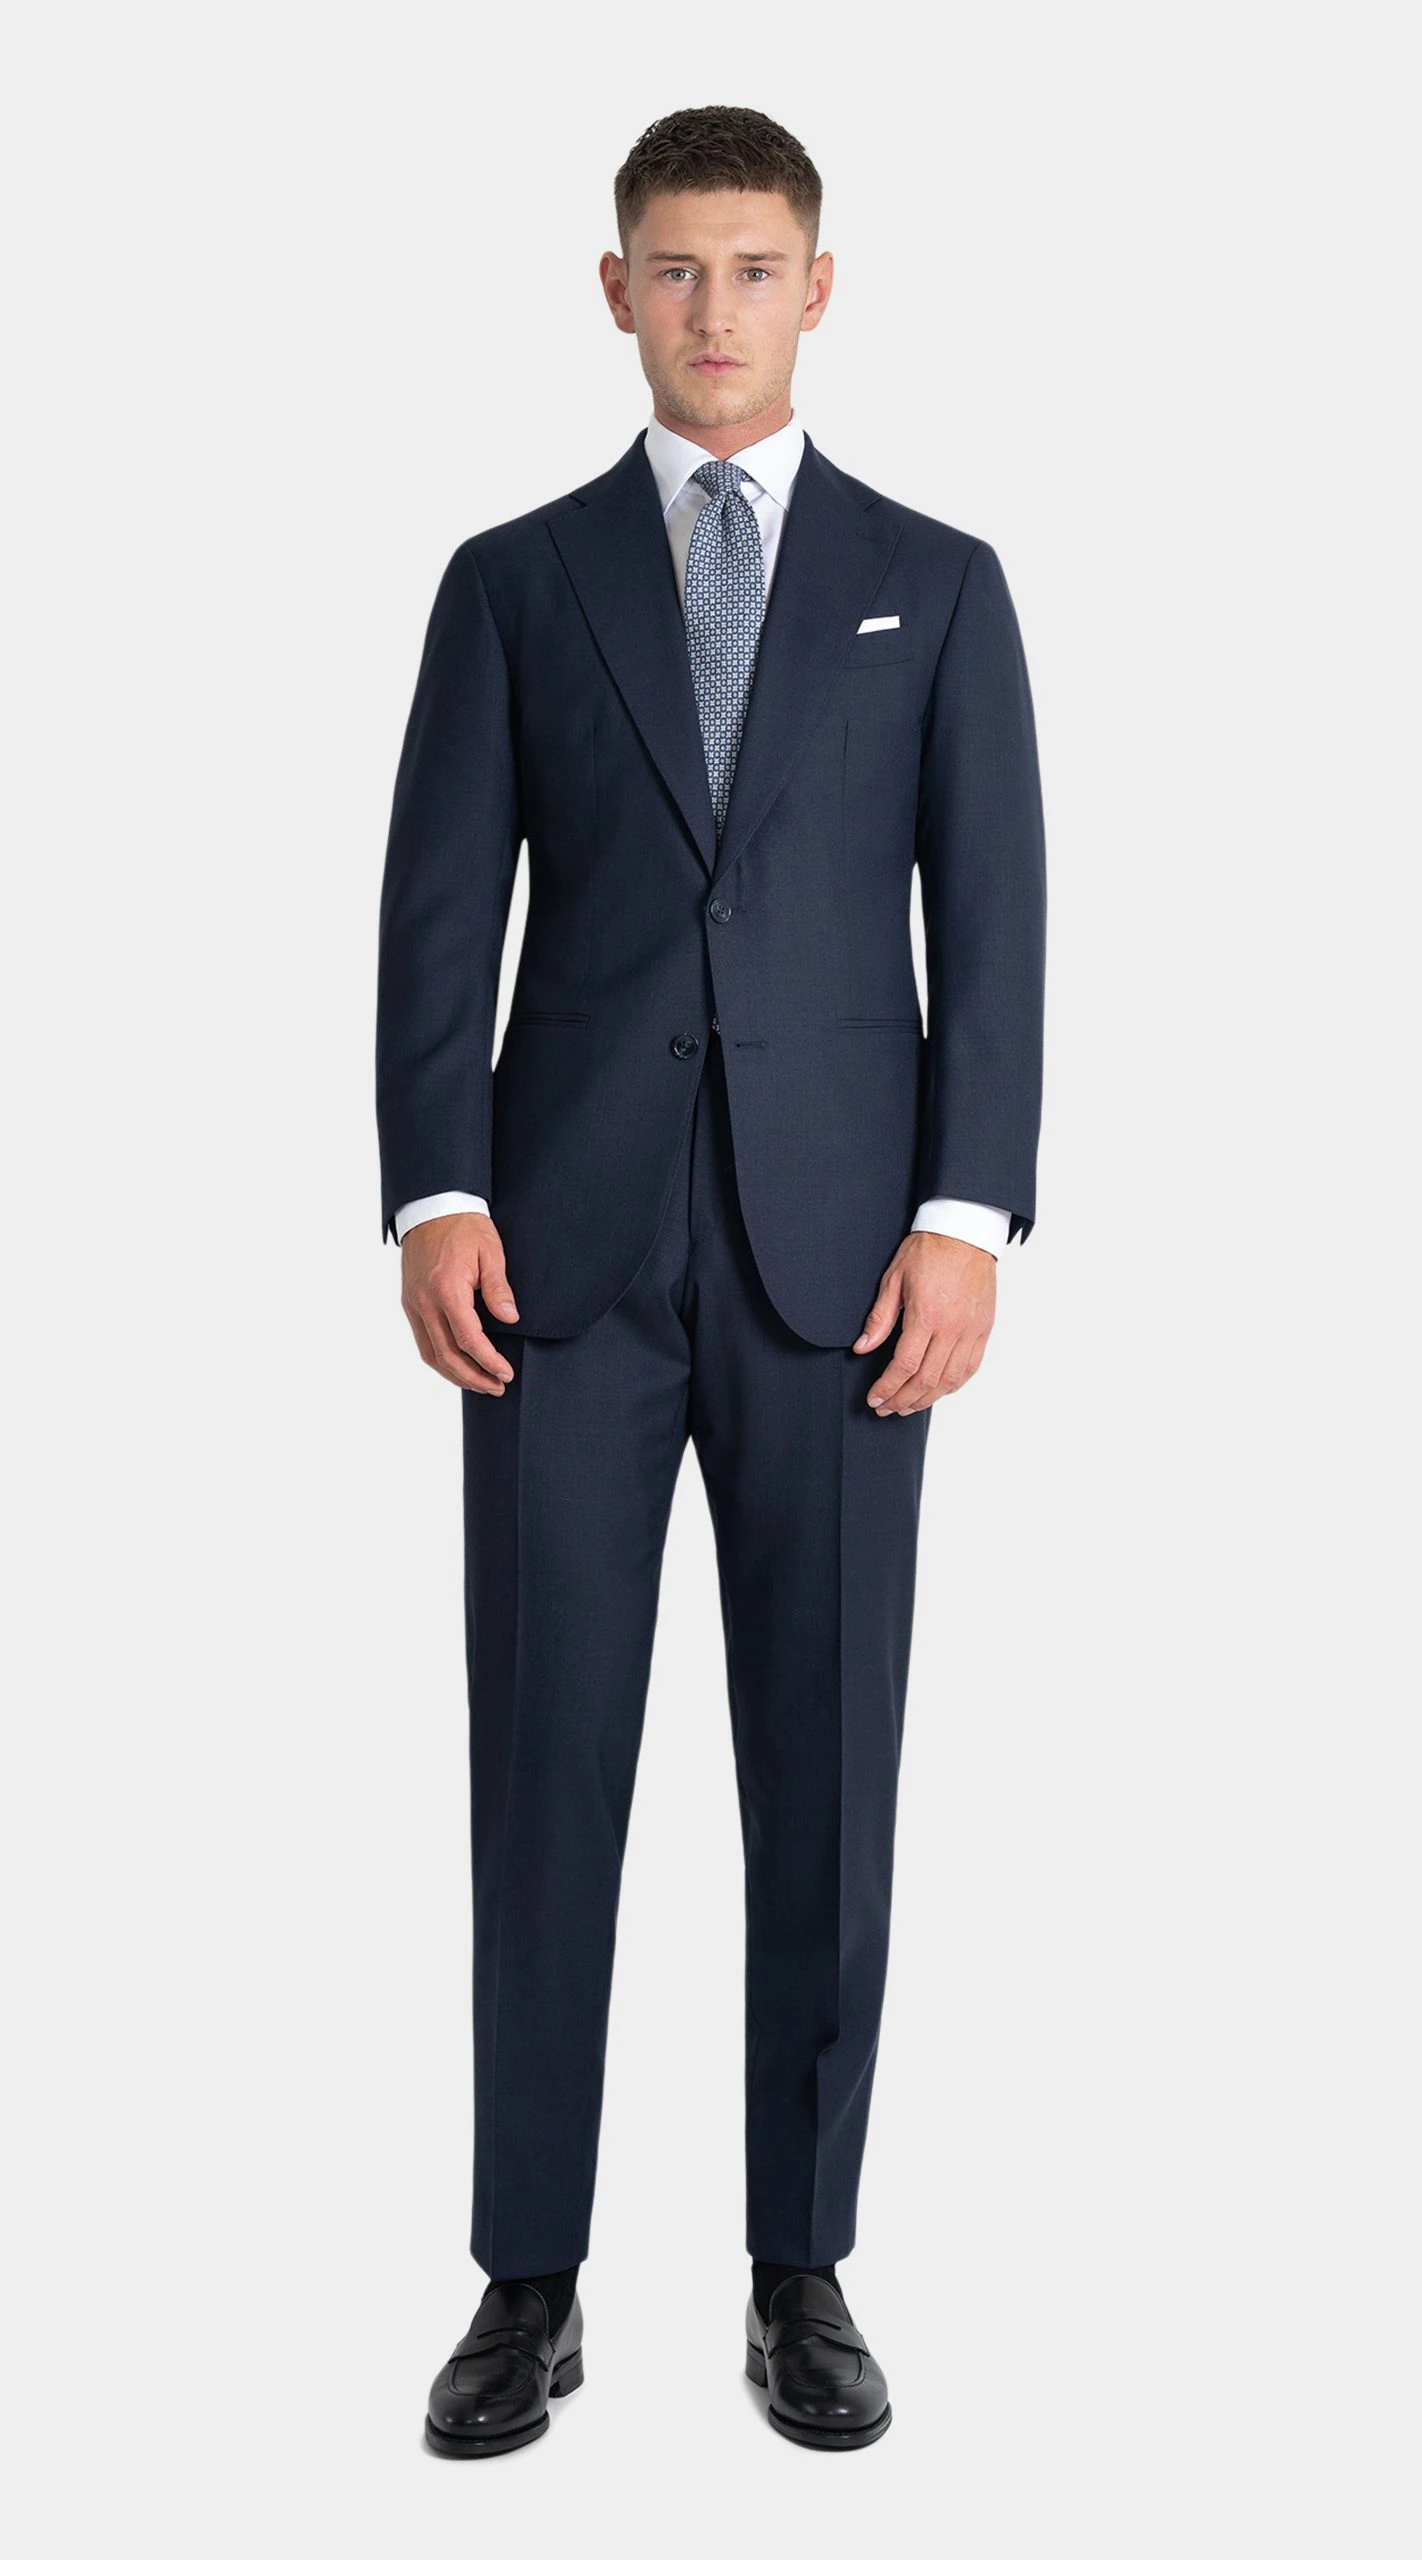 Navy melange suit in twistair fabric, made to measure tailored by Mond